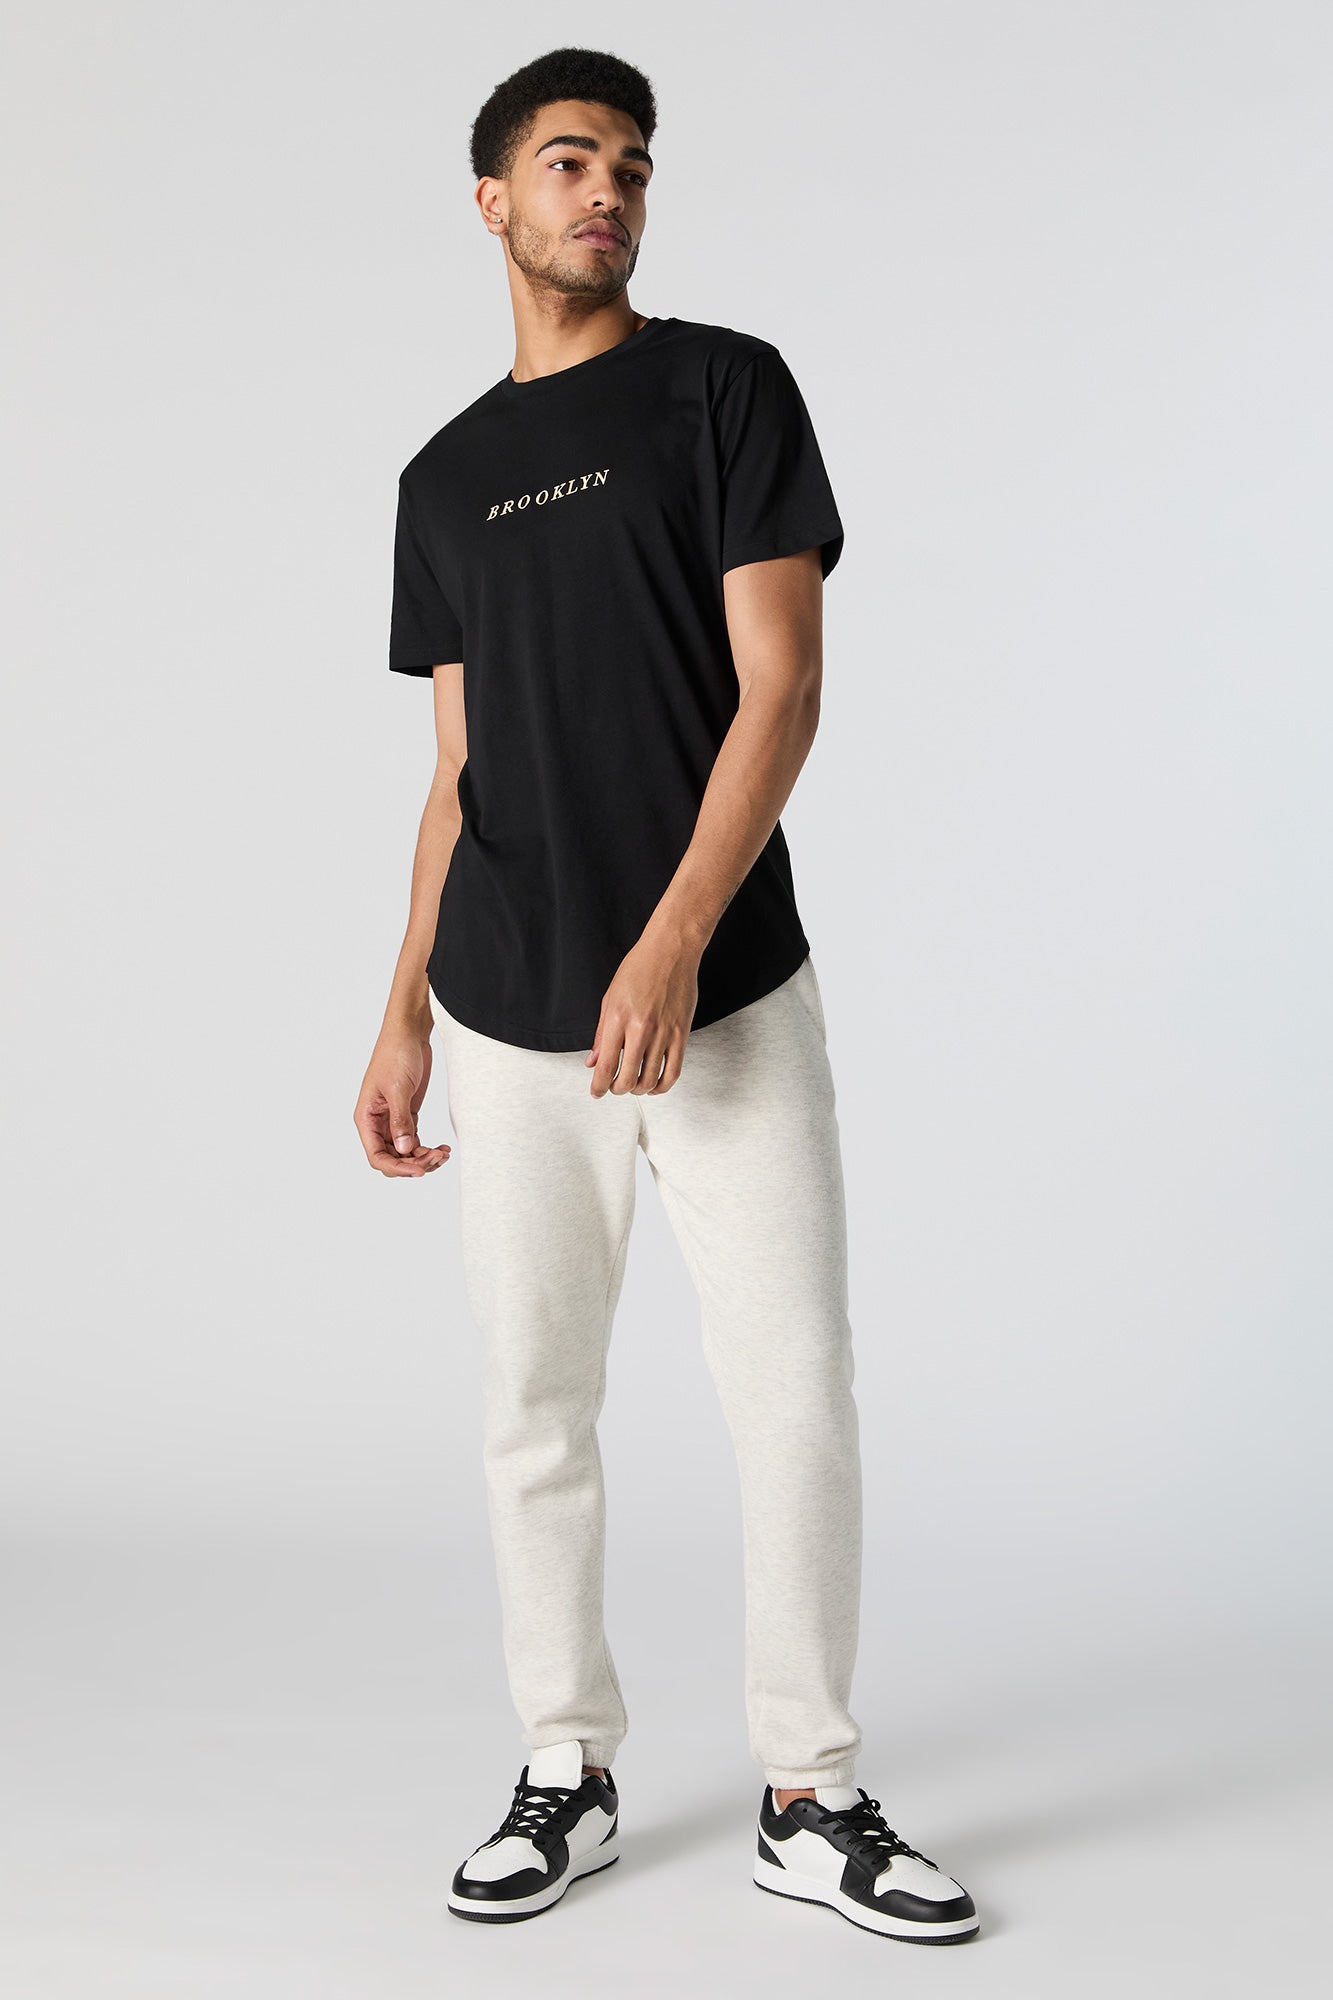 Brooklyn Embroidered T-Shirt